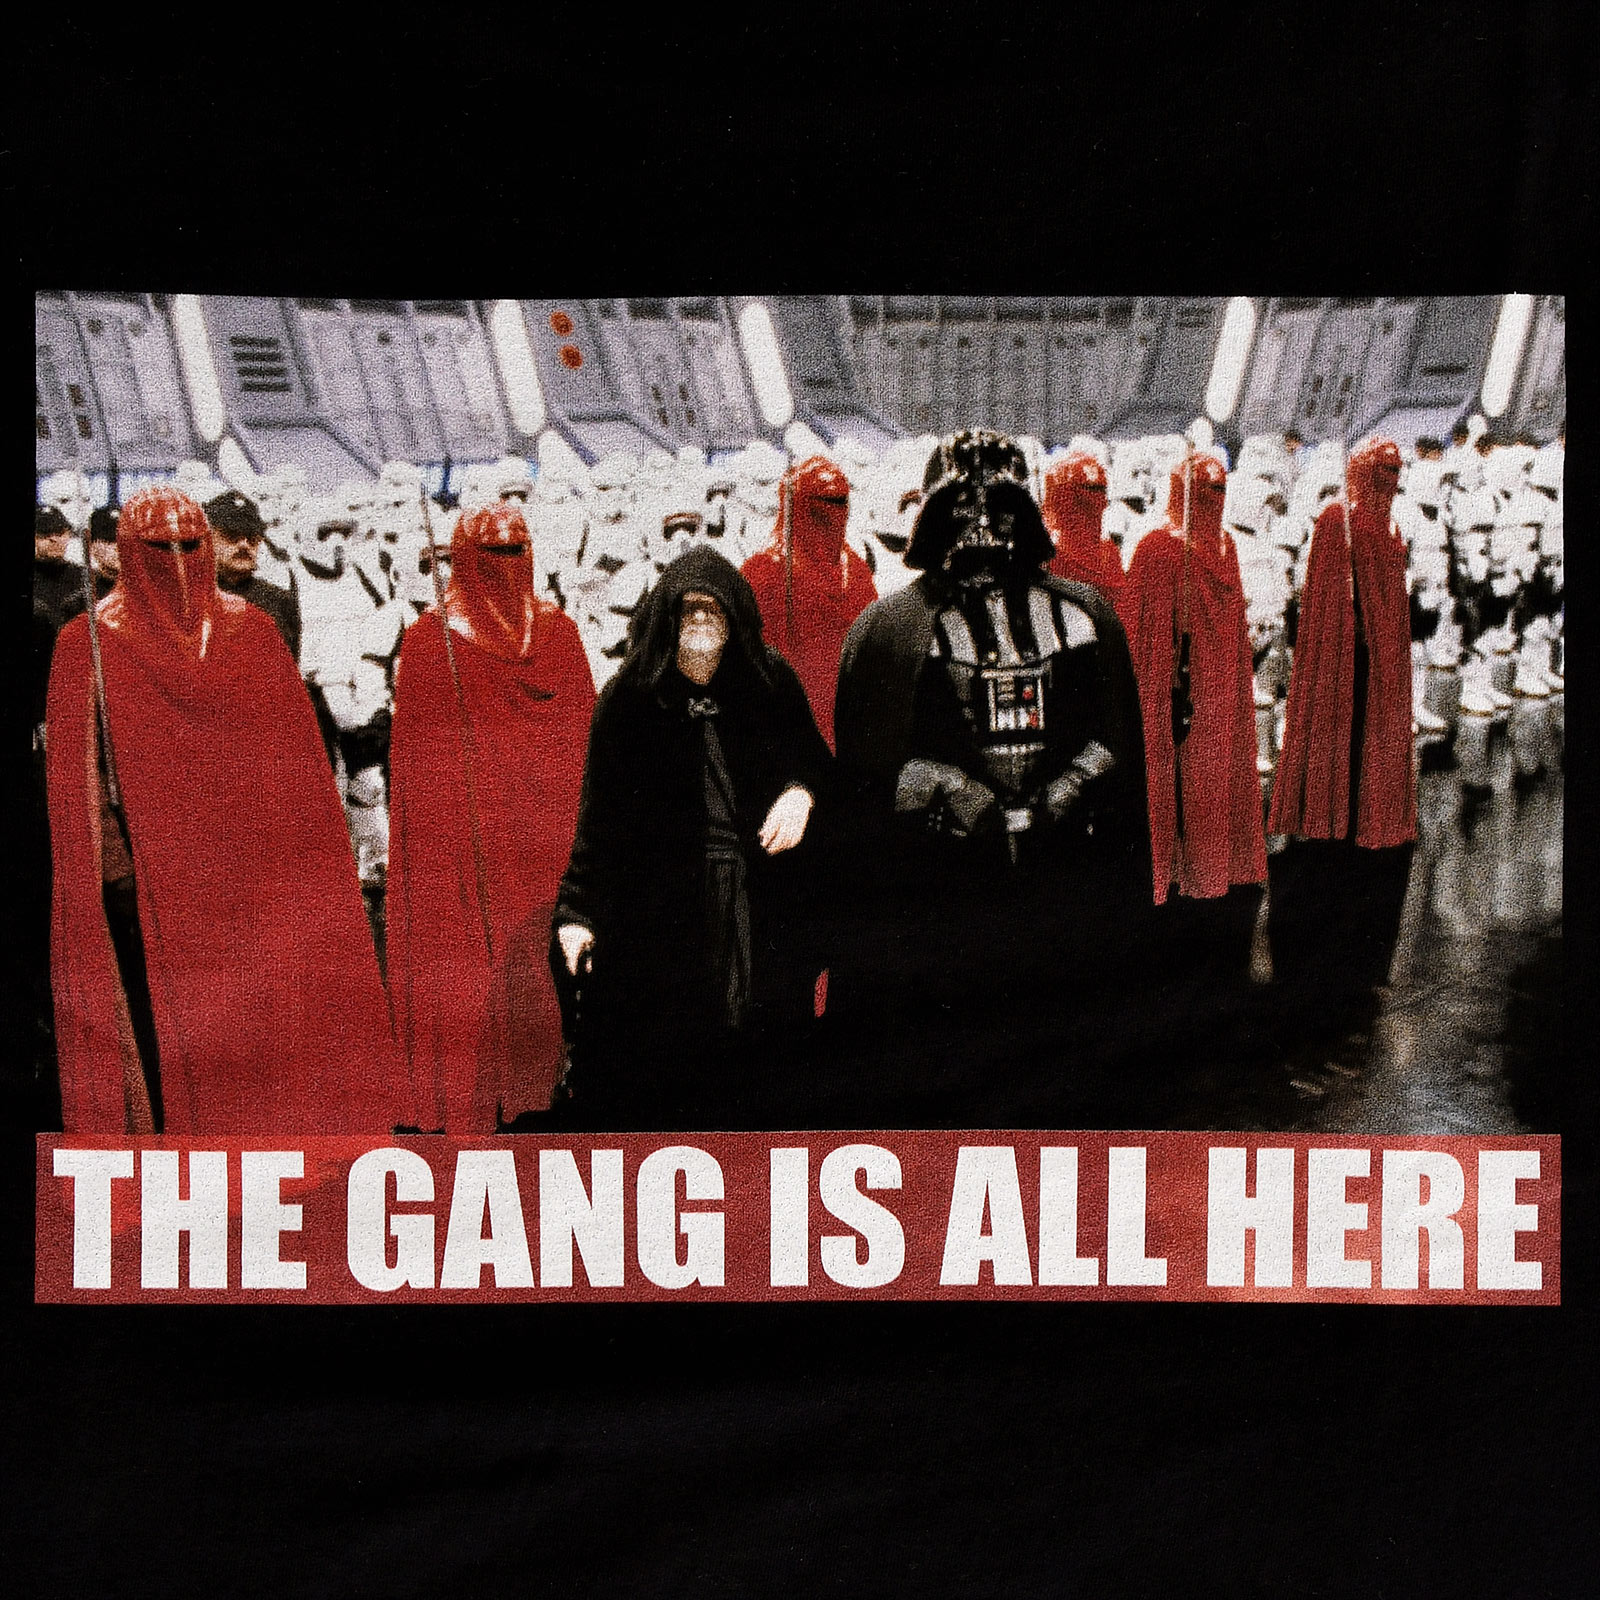 Star Wars - The Gang Is All Here black T-shirt